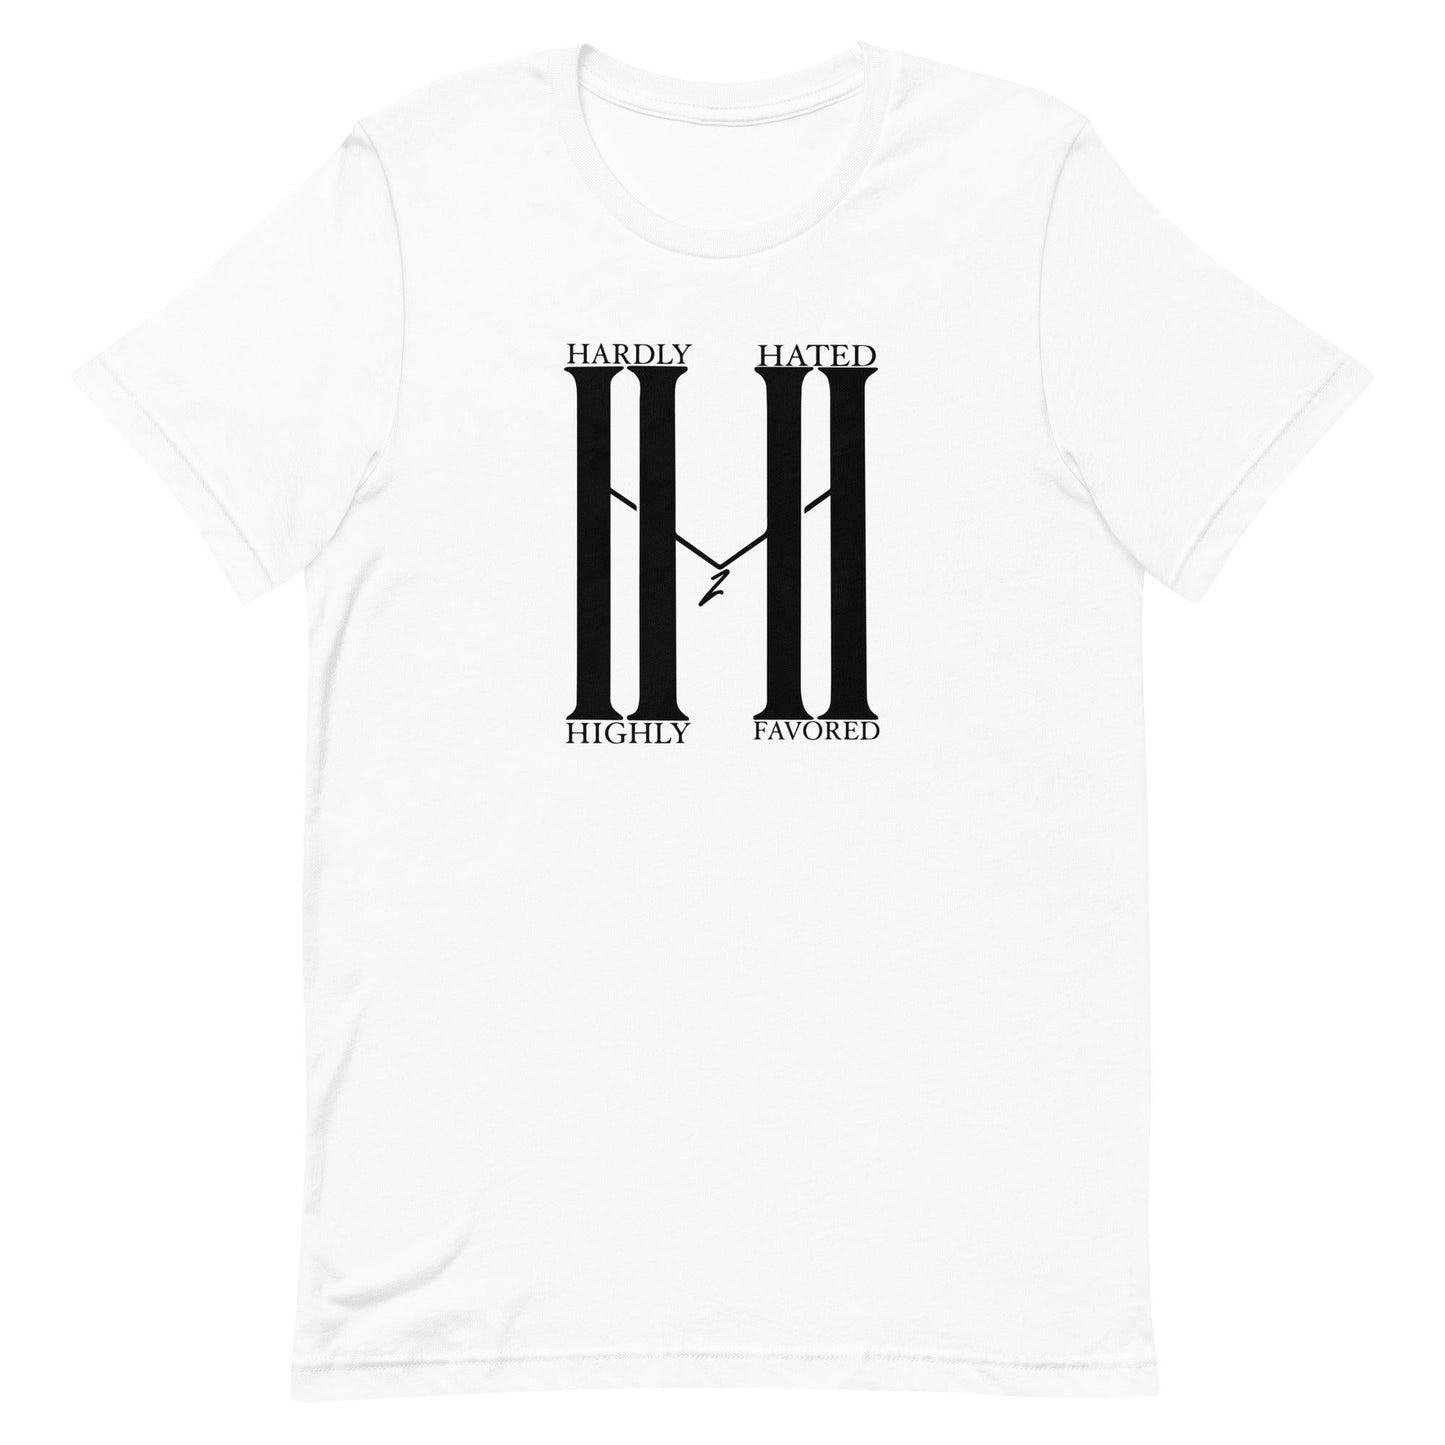 Daquan Jeffries "Highly Favored" t-shirt - Fan Arch